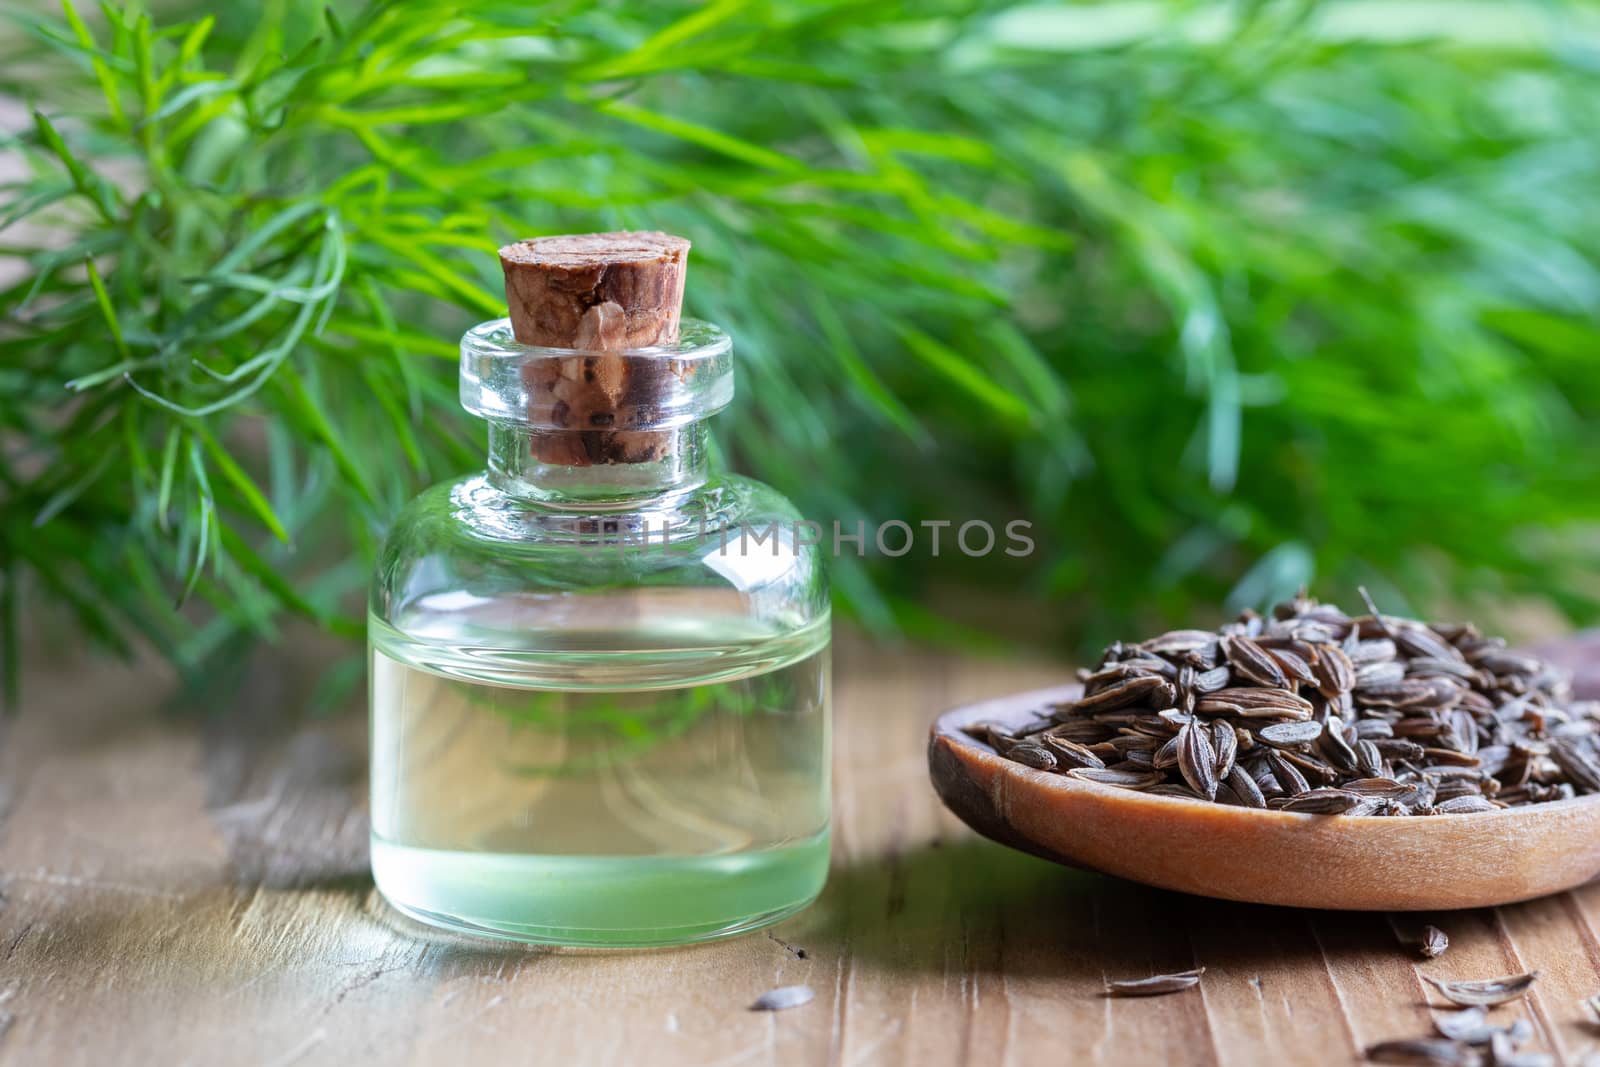 A bottle of dill seed oil with Anethum graveolens seeds and leaves